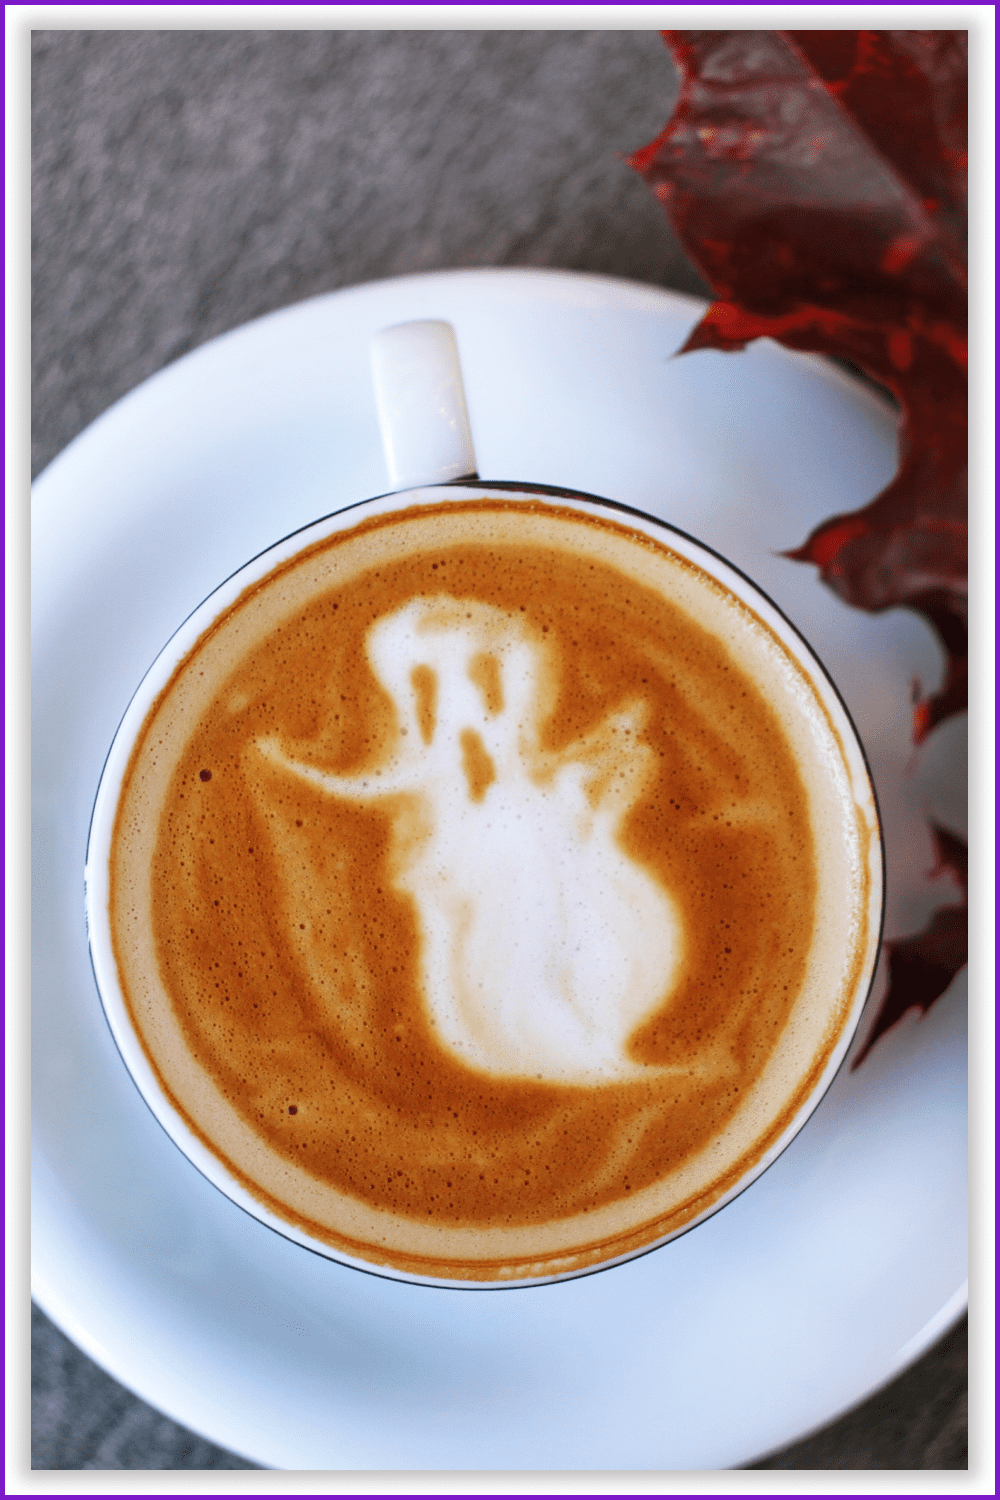 Photo of a cup of coffee with milk with a picture of a ghost.